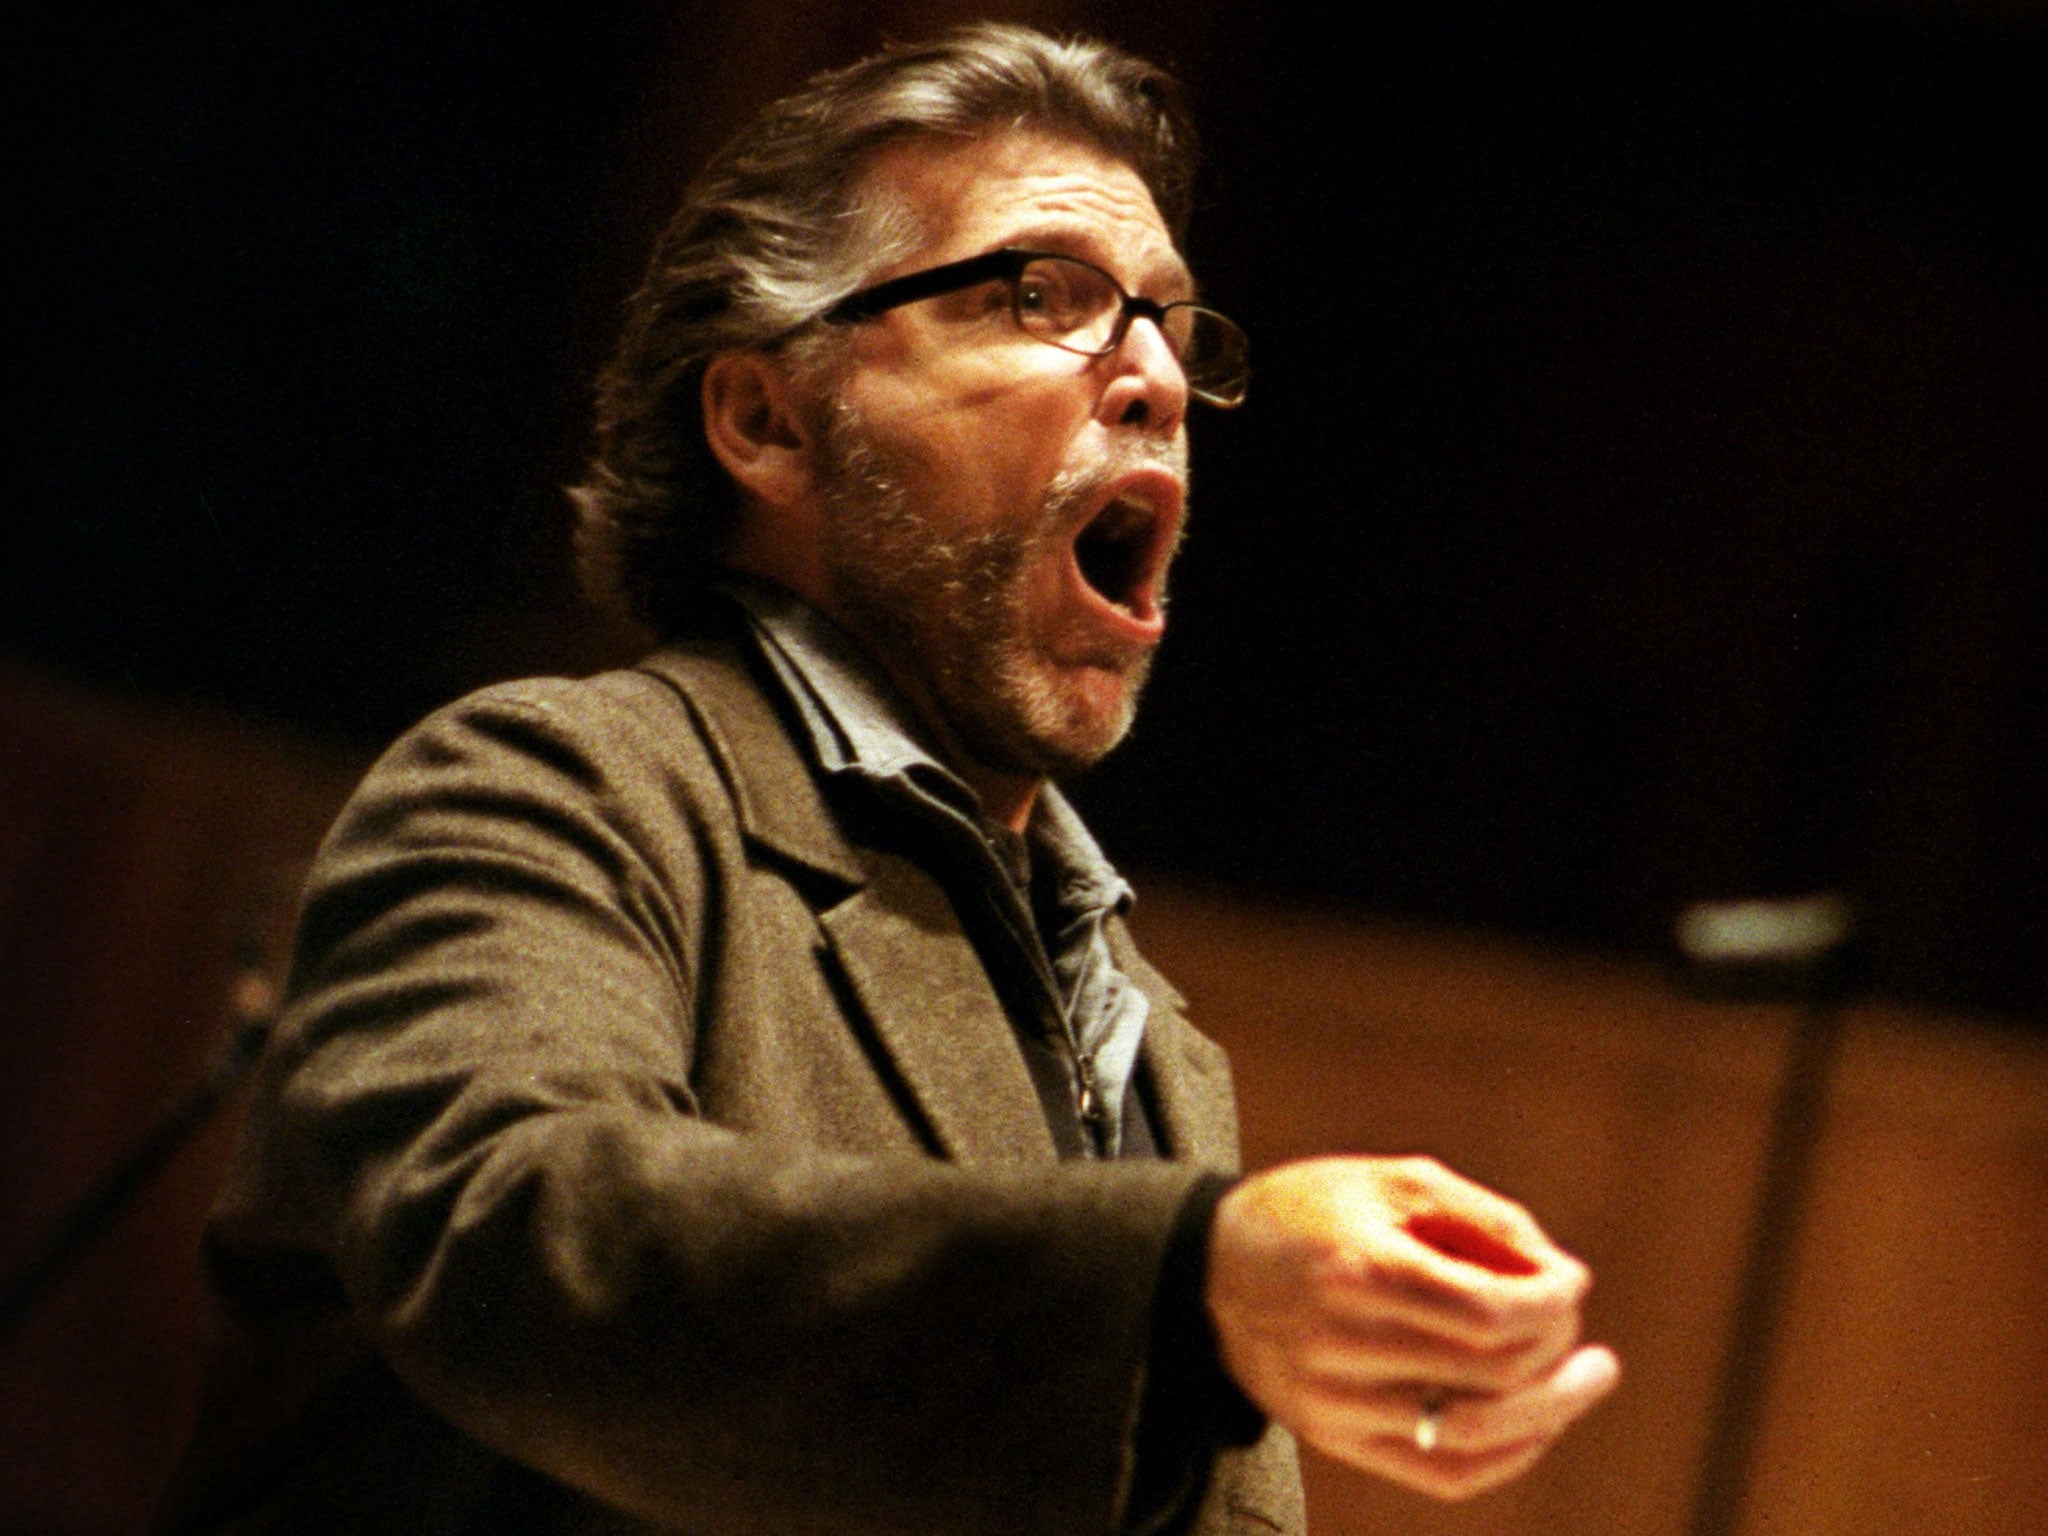 Thomas Hampson in rehearsal for Strauss’s Notturno, which gestures towards Schoenberg and Berg